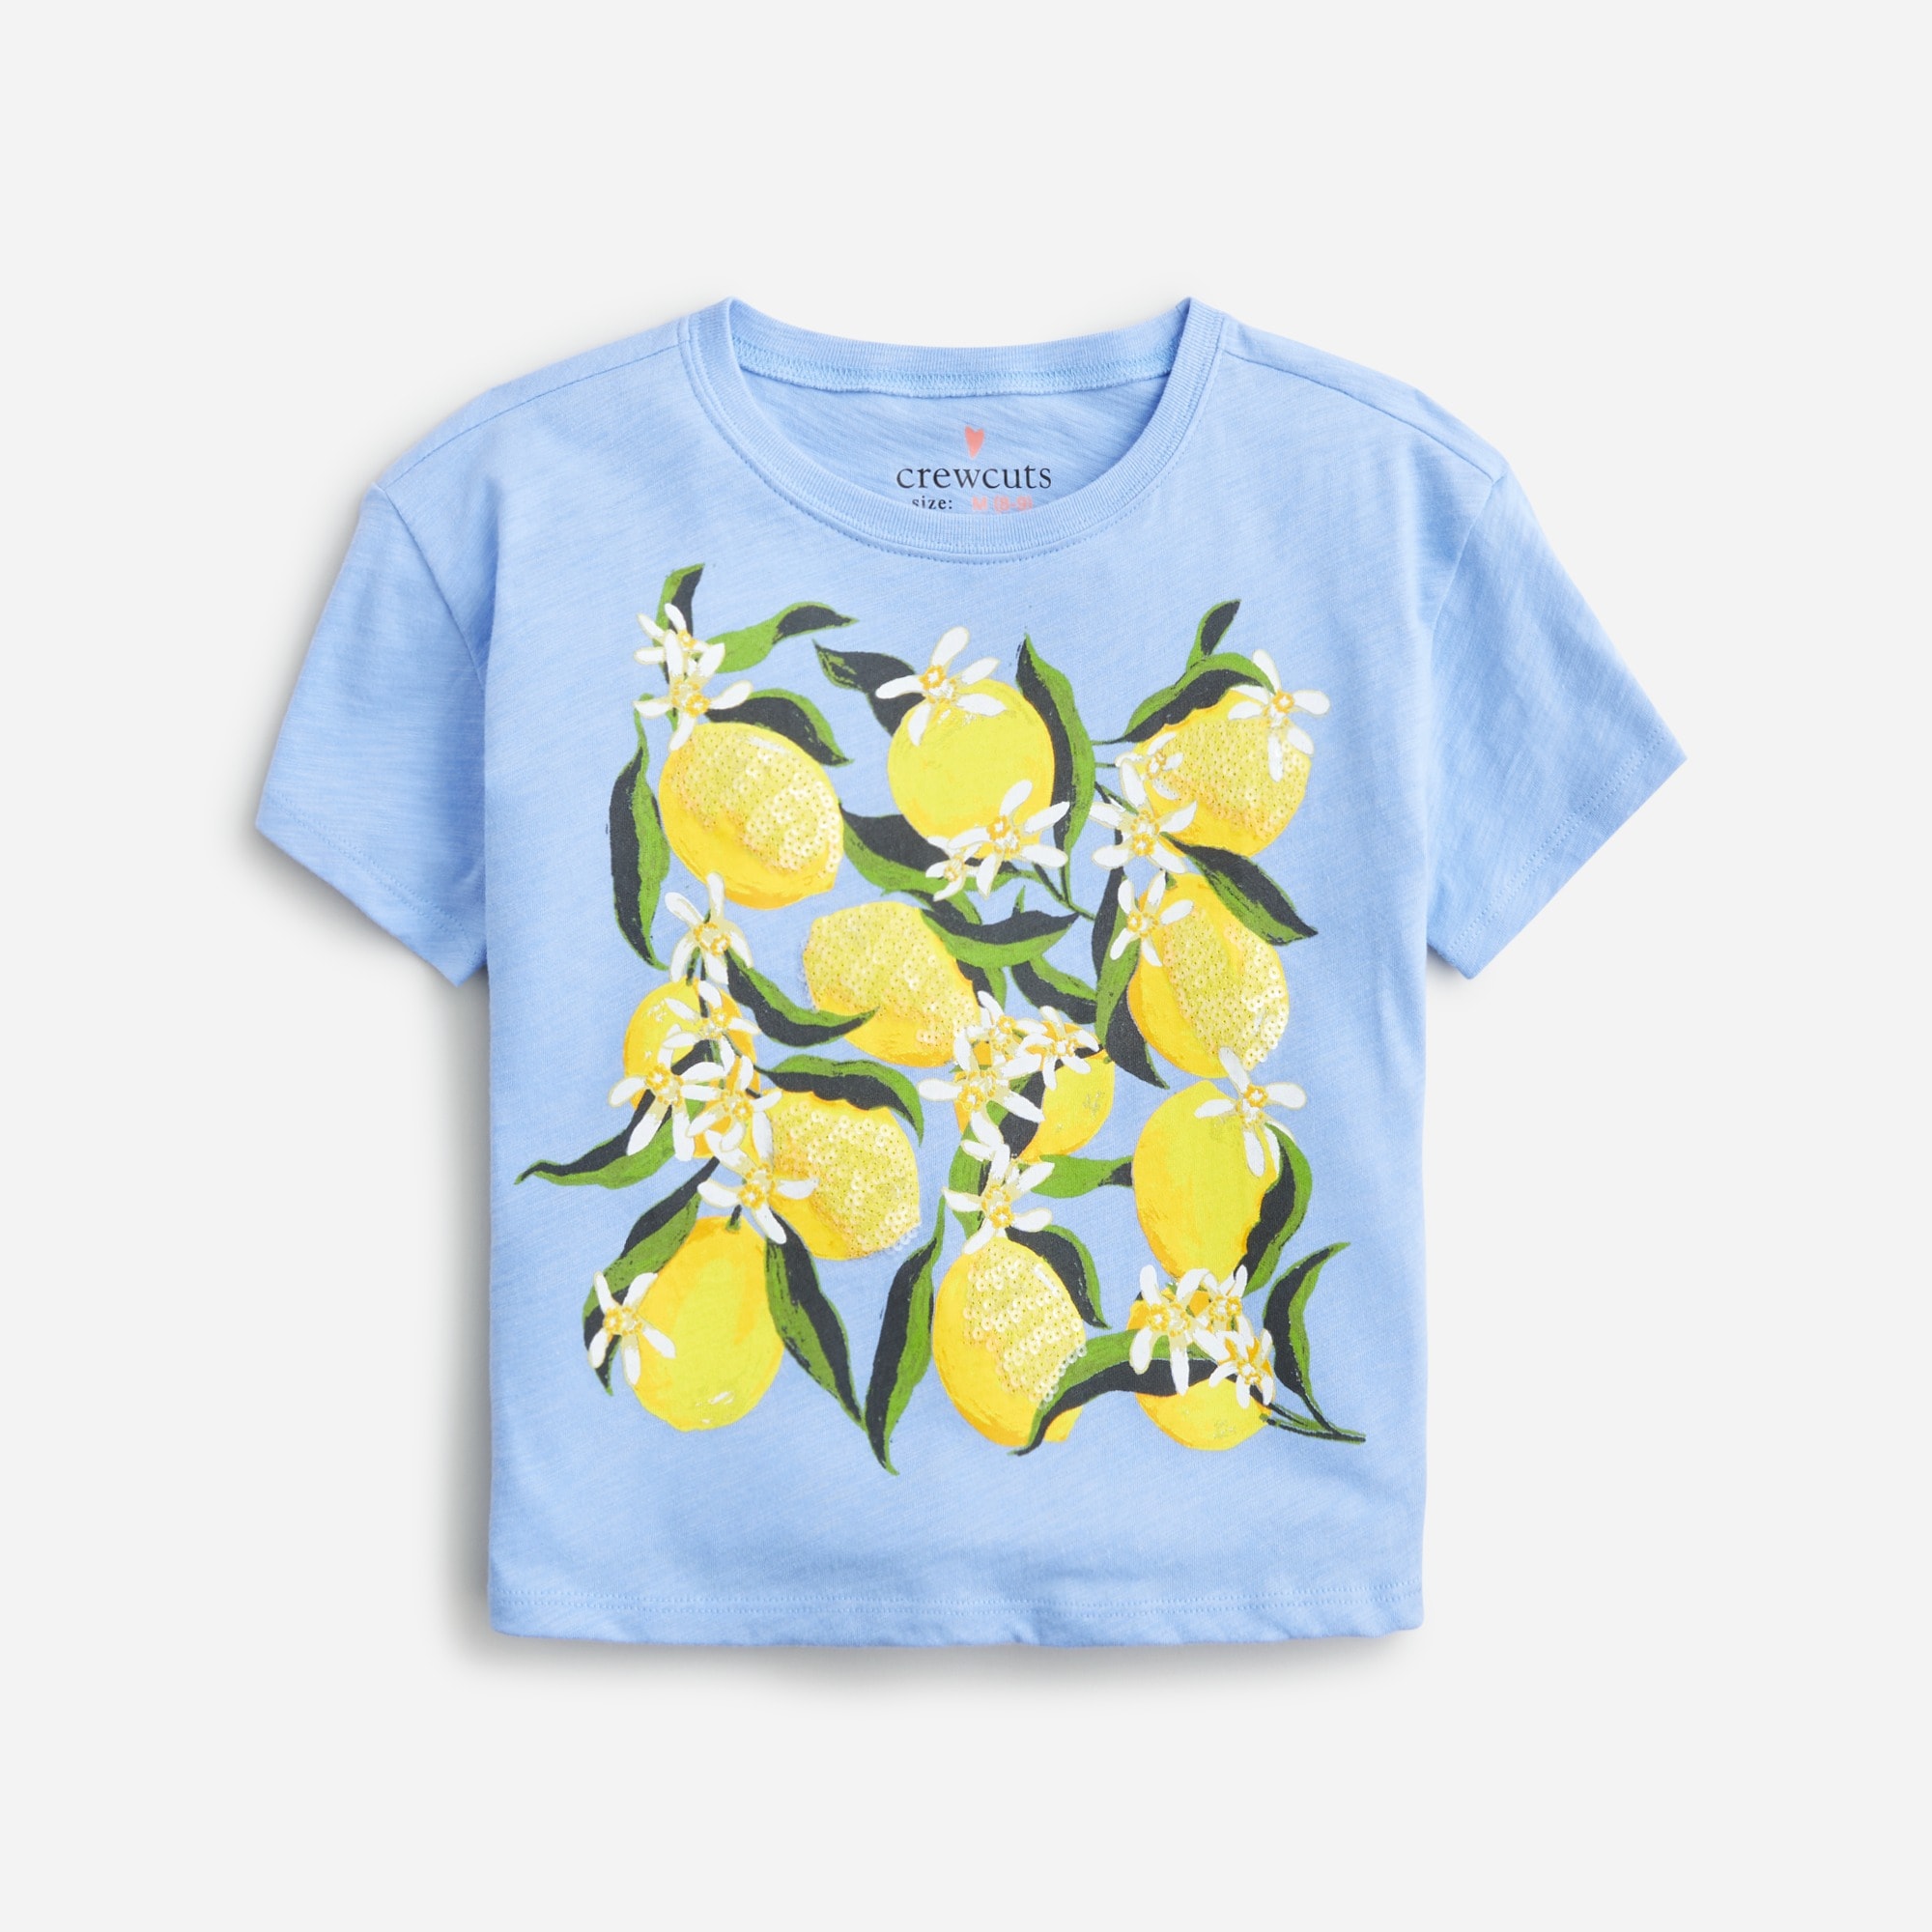  Girls' cropped lemon graphic T-shirt with sequins